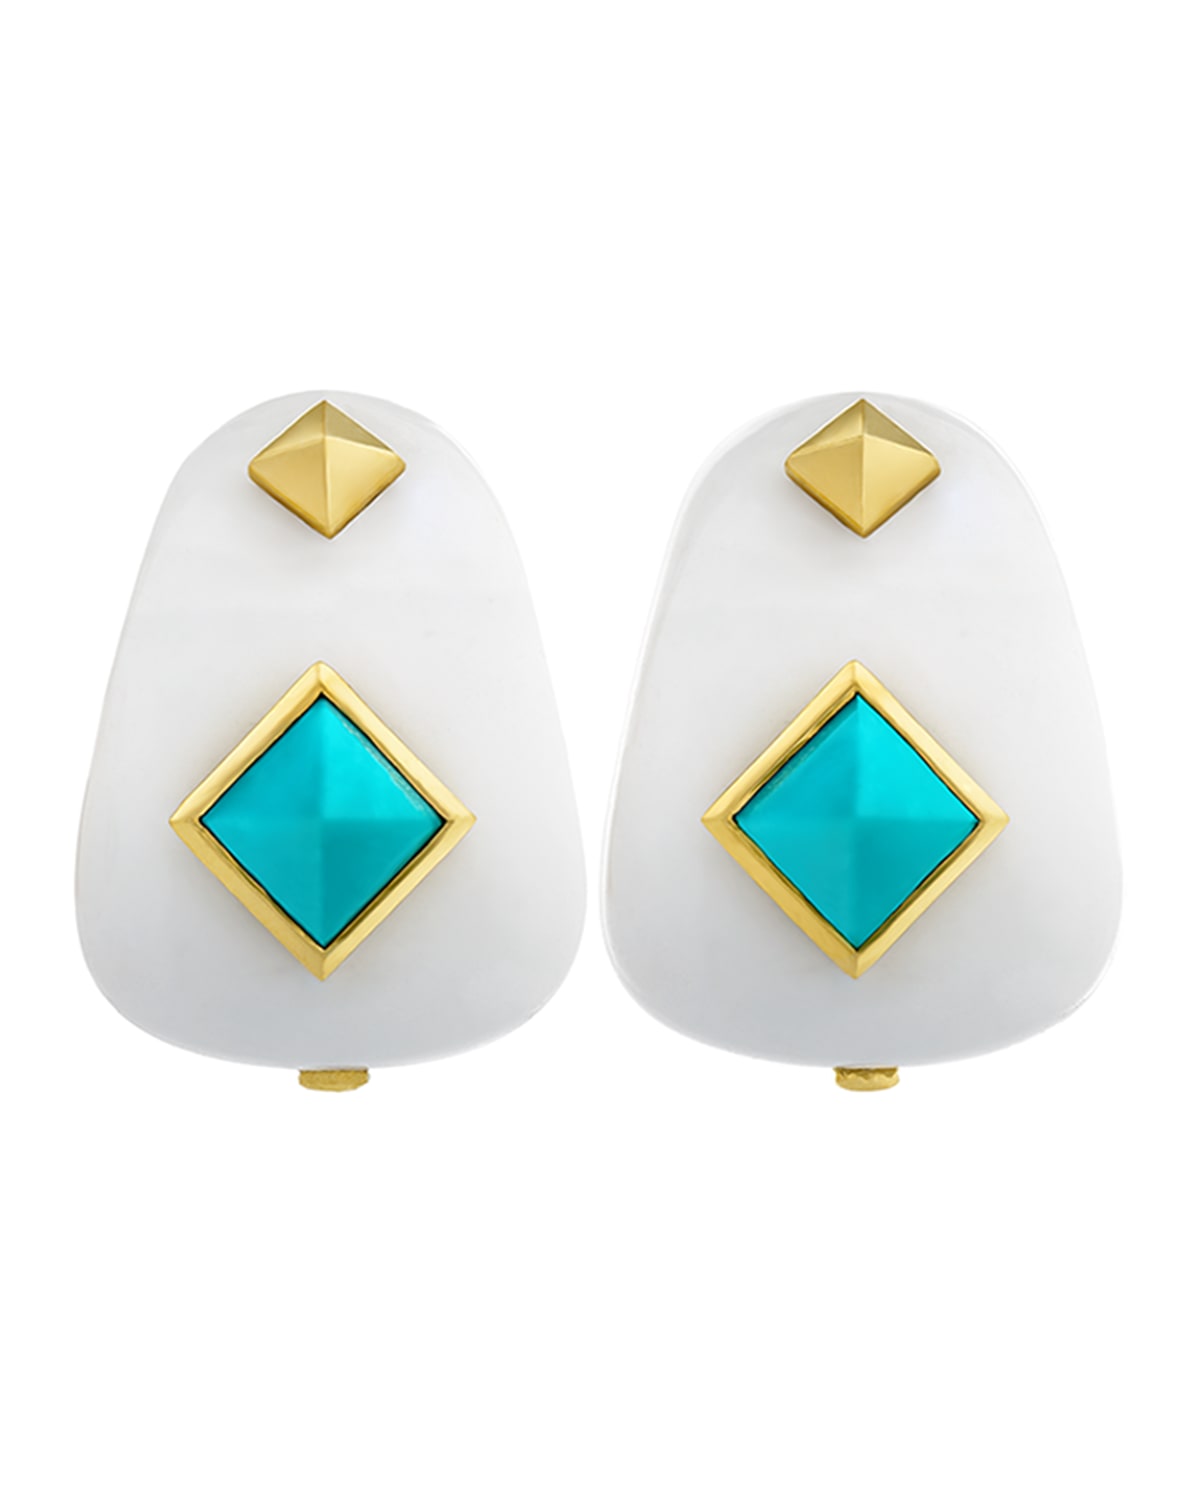 Margot McKinney Jewelry Weekend White Agate Earrings with Turquoise Studs